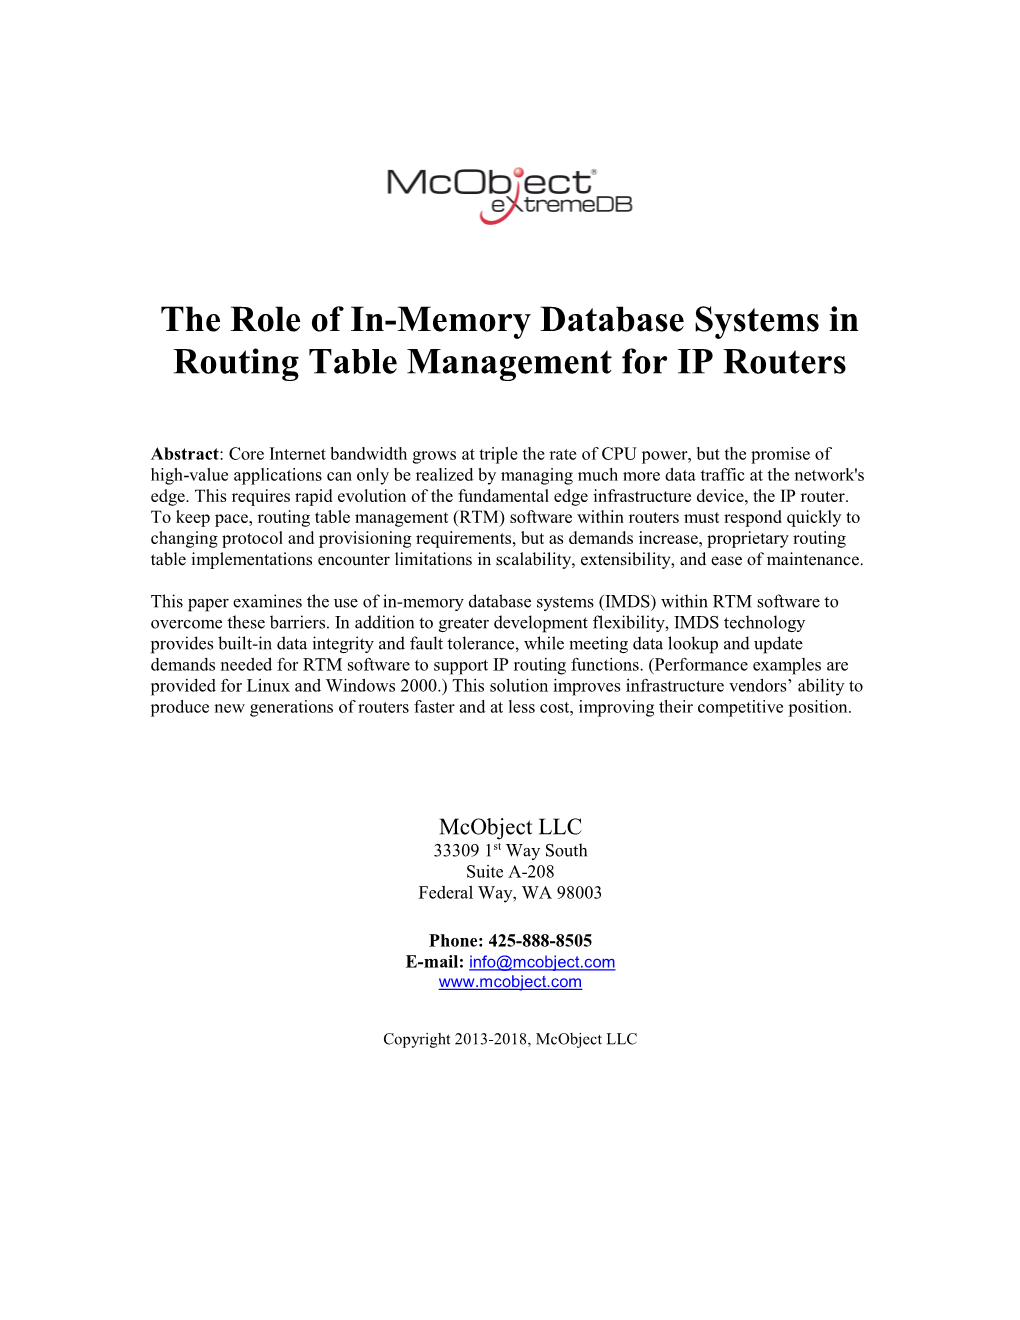 The Role of In-Memory Database Systems in Routing Table Management for IP Routers